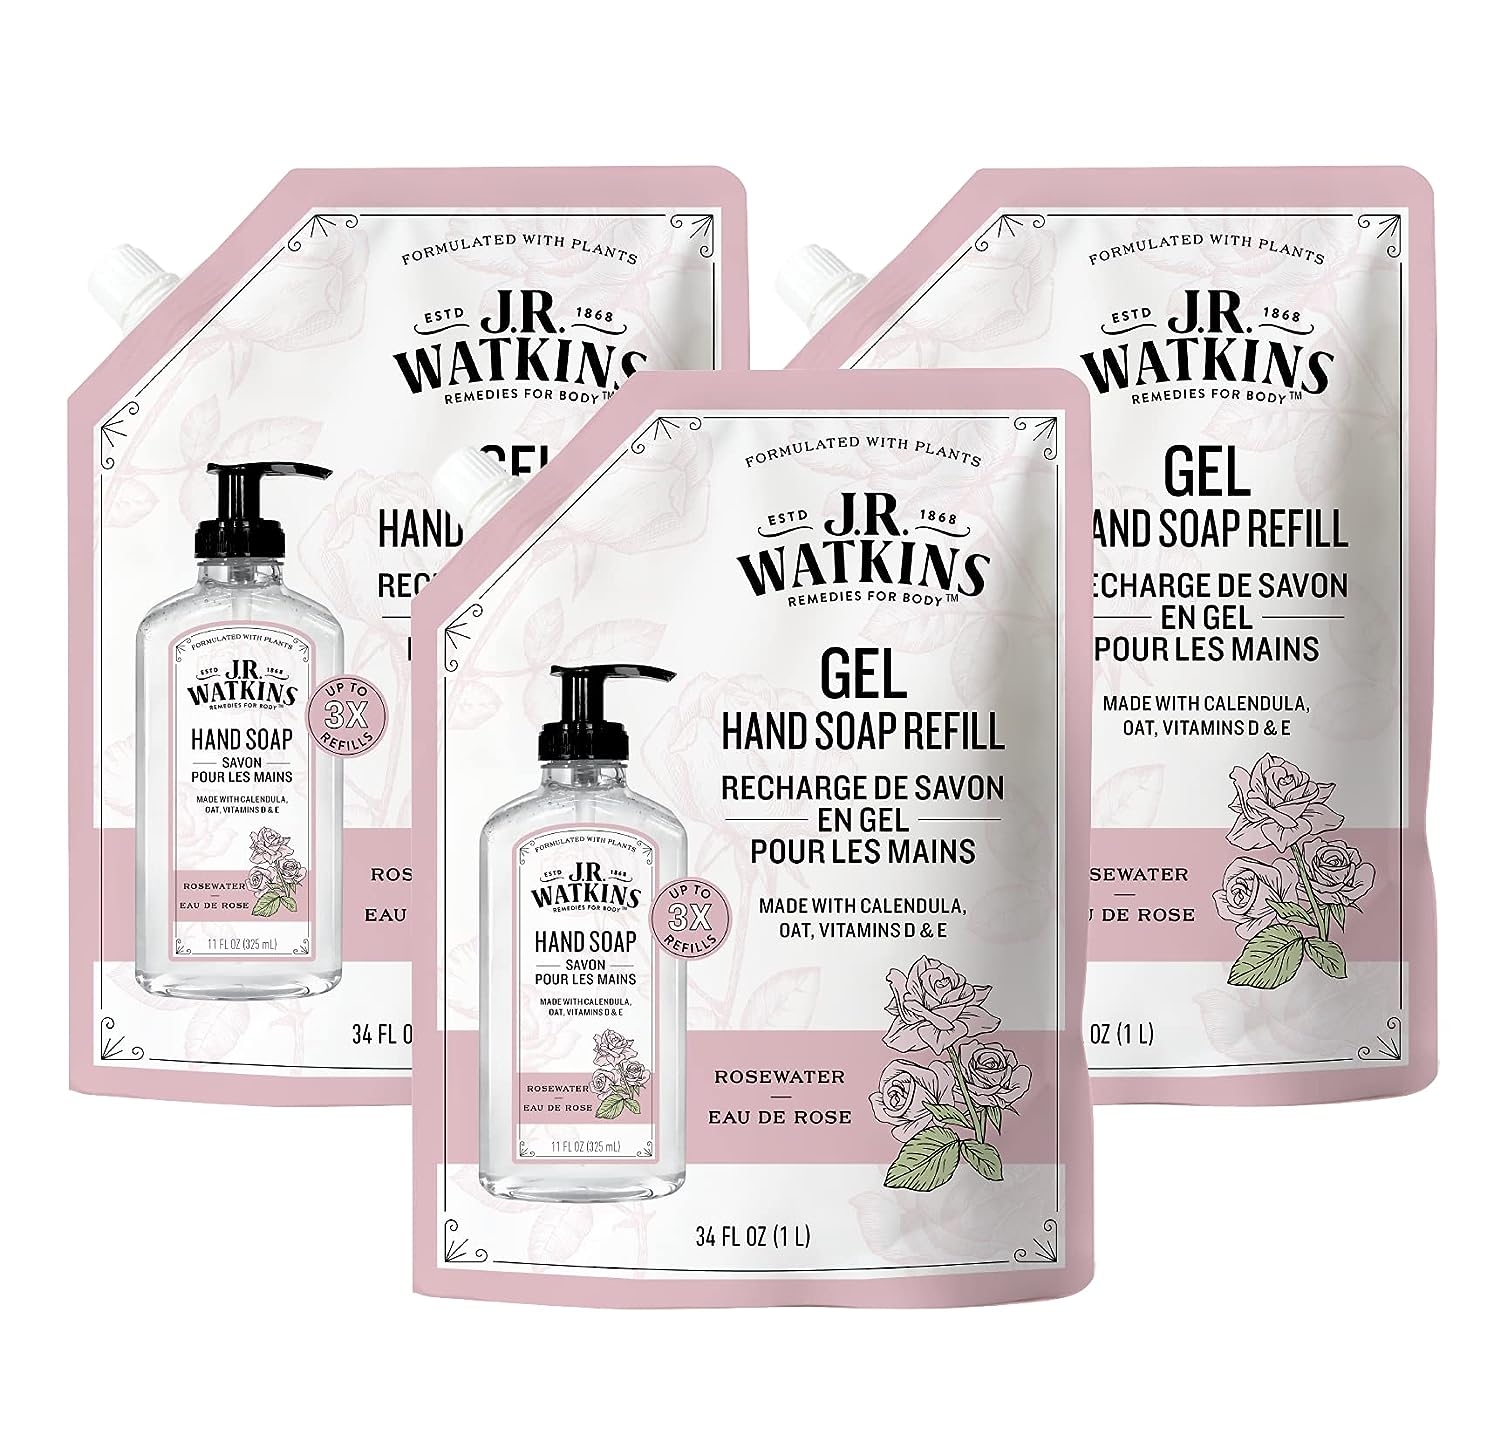 J.R. Watkins Gel Hand Soap With Dispenser, Moisturizing Hand Wash, All Natural, Alcohol-Free, Cruelty-Free, USA Made, Rosewater,